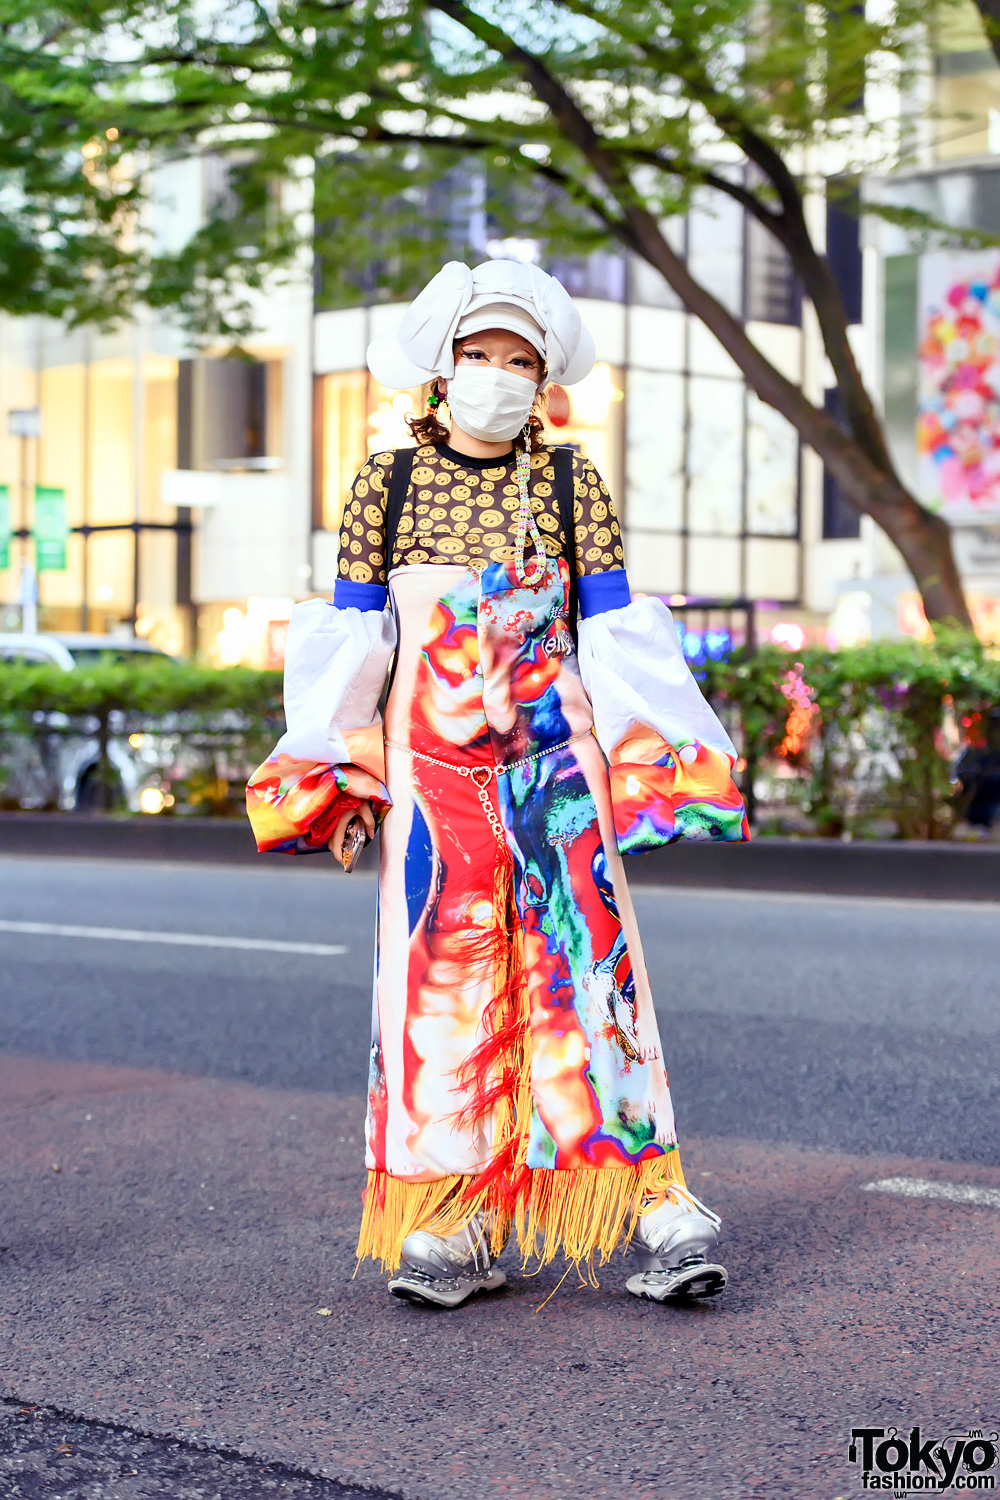 Japanese Fashion Designer in Colorful Avantgarde Handmade Street Style & ESQAPE Sping Shoes in Harajuku